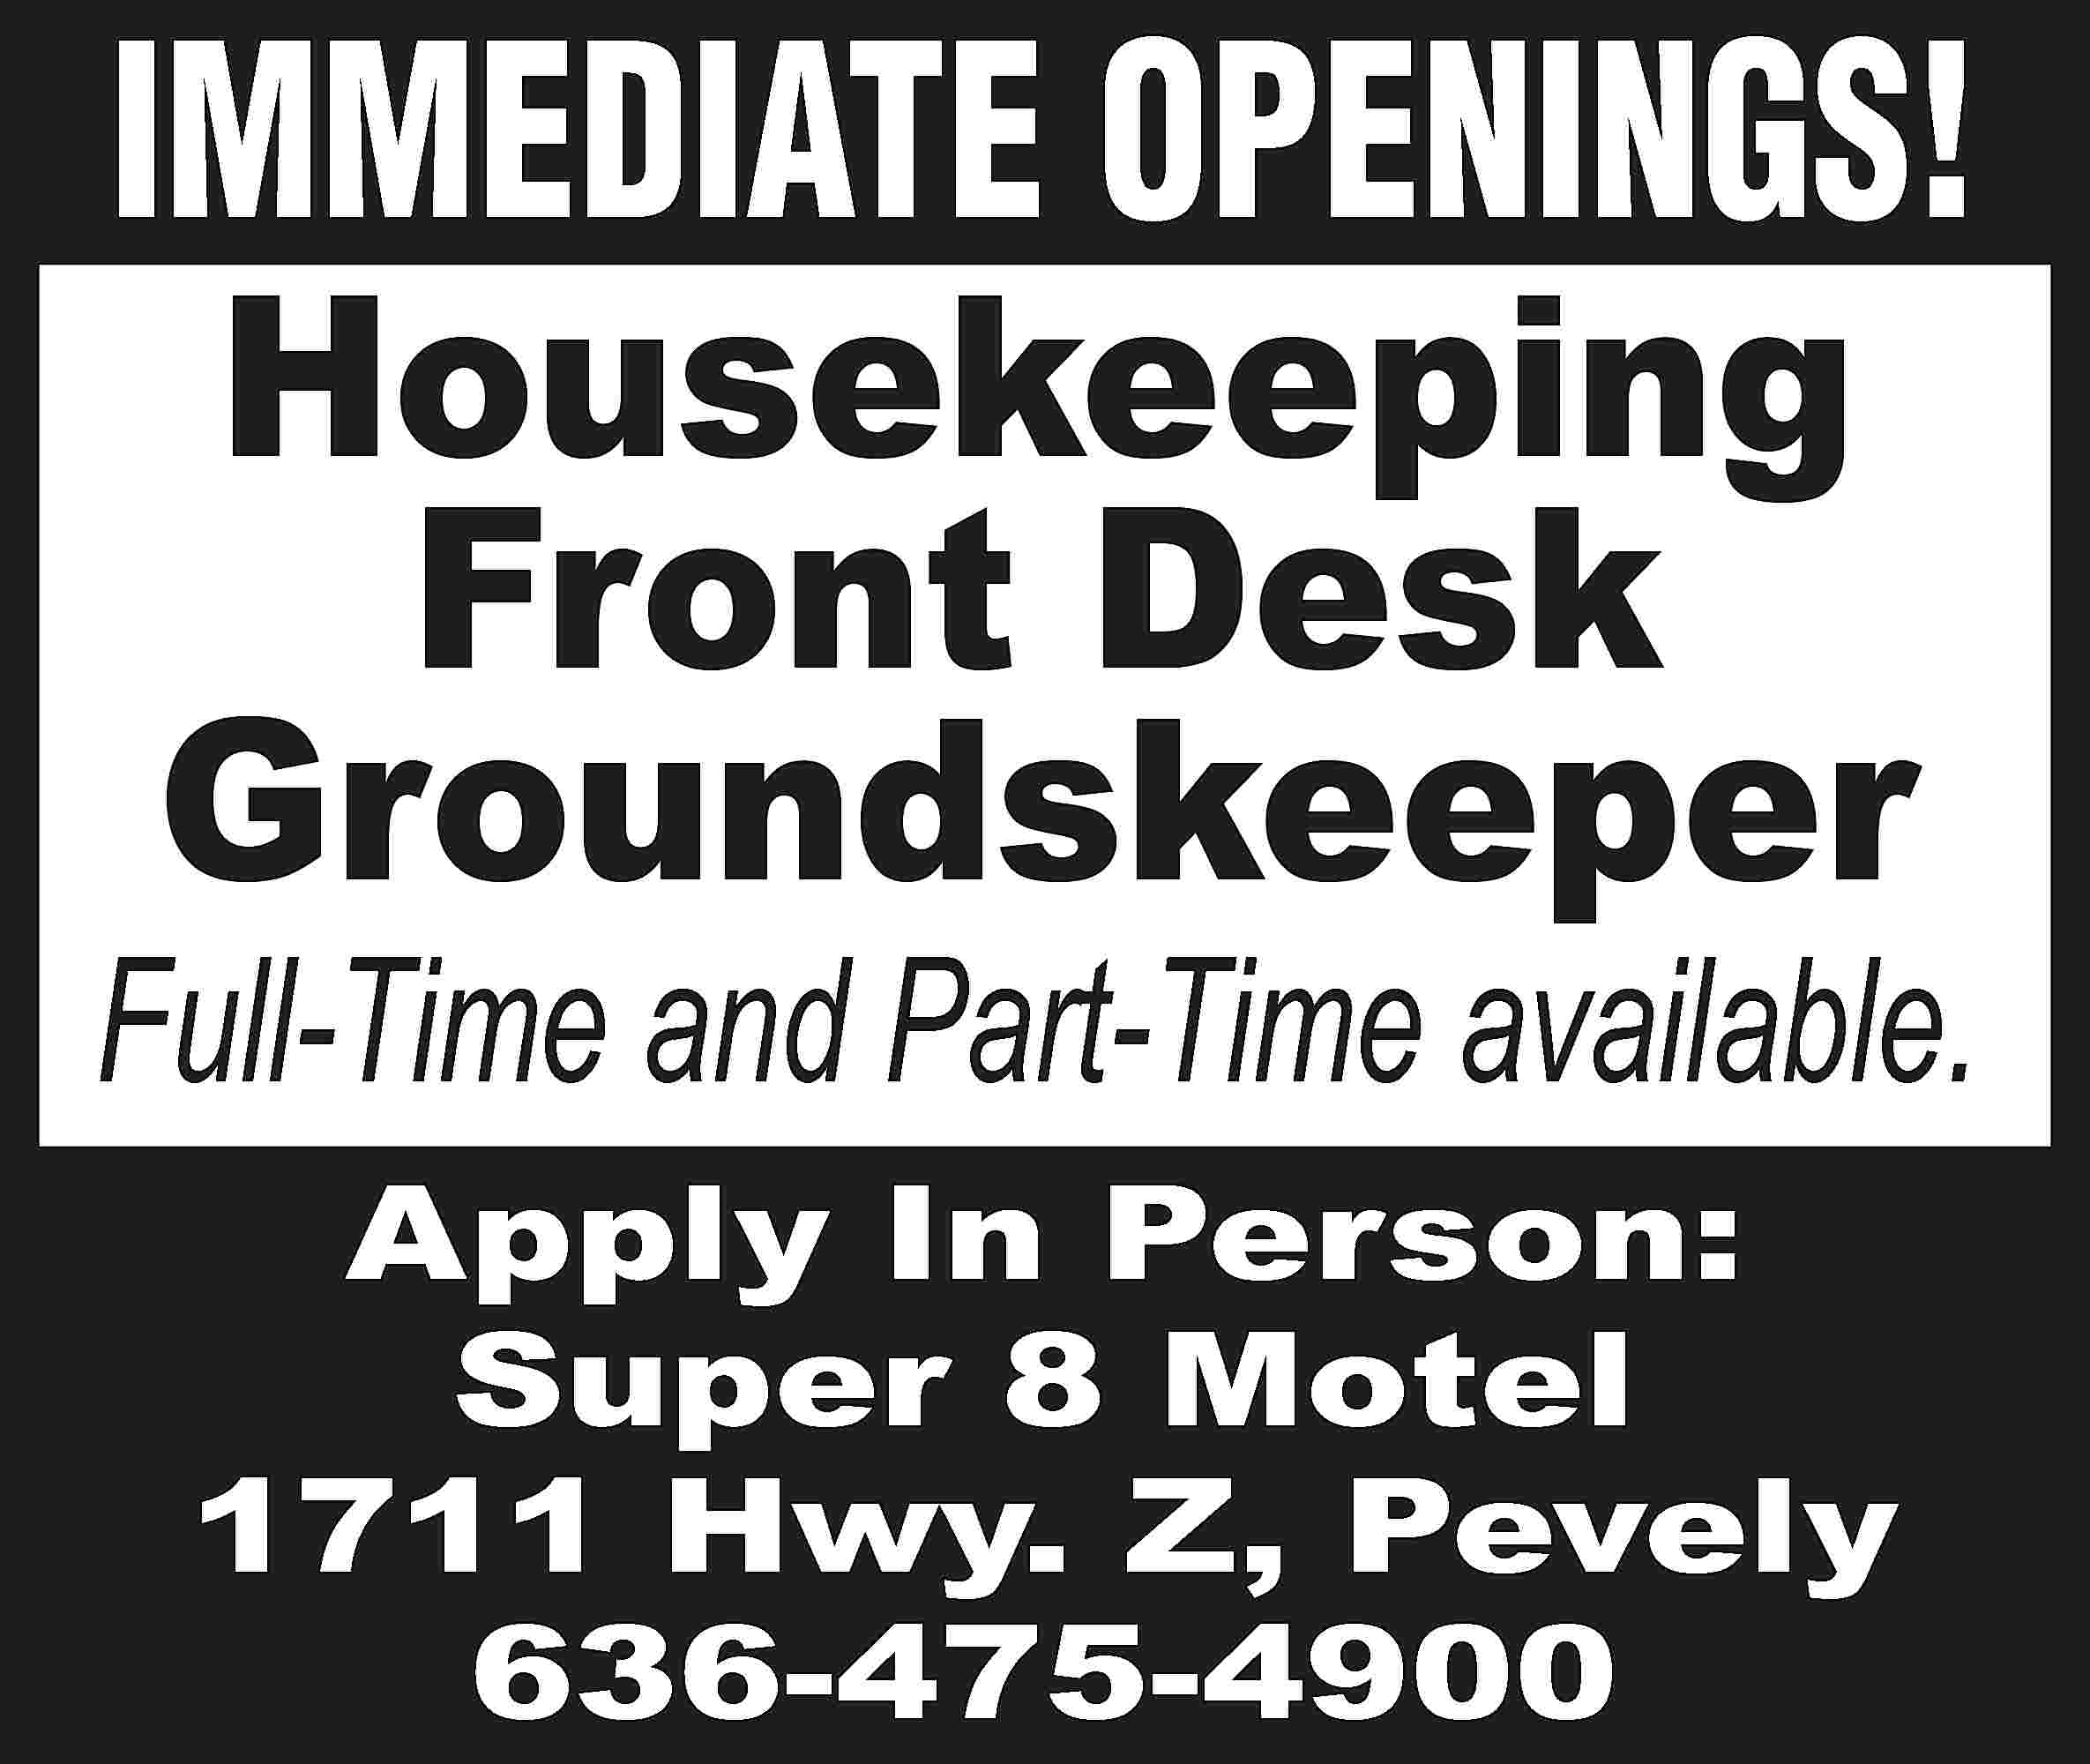 IMMEDIATE OPENINGS! Housekeeping Front Desk  IMMEDIATE OPENINGS! Housekeeping Front Desk Groundskeeper Full-Time and Part-Time available. Apply In Person: Super 8 Motel 1711 Hwy. Z, Pevely 636-475-4900